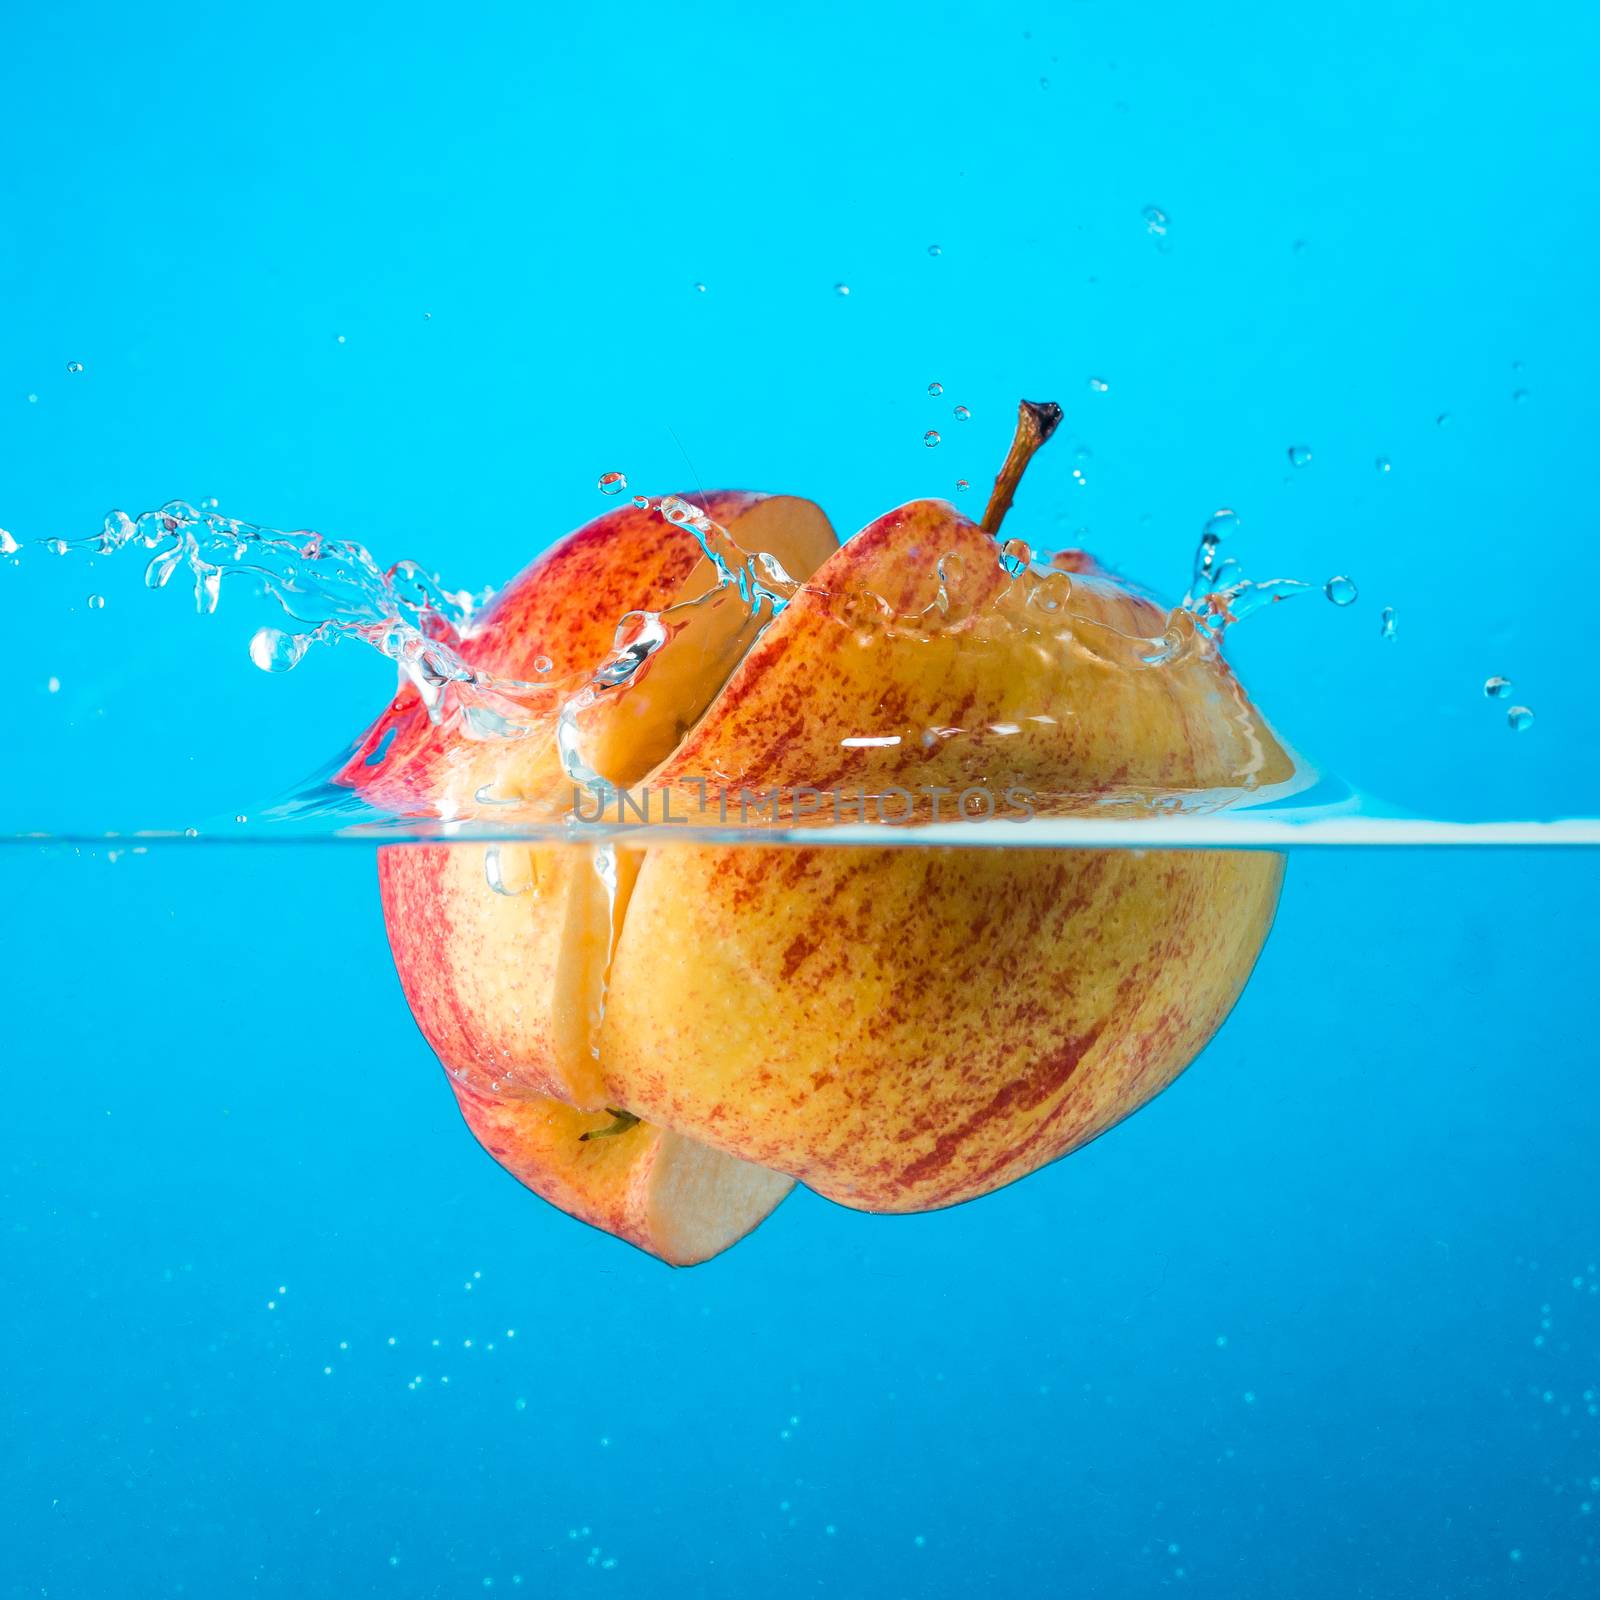 Water splash. Apple under water. Air bubbles and transparent water.